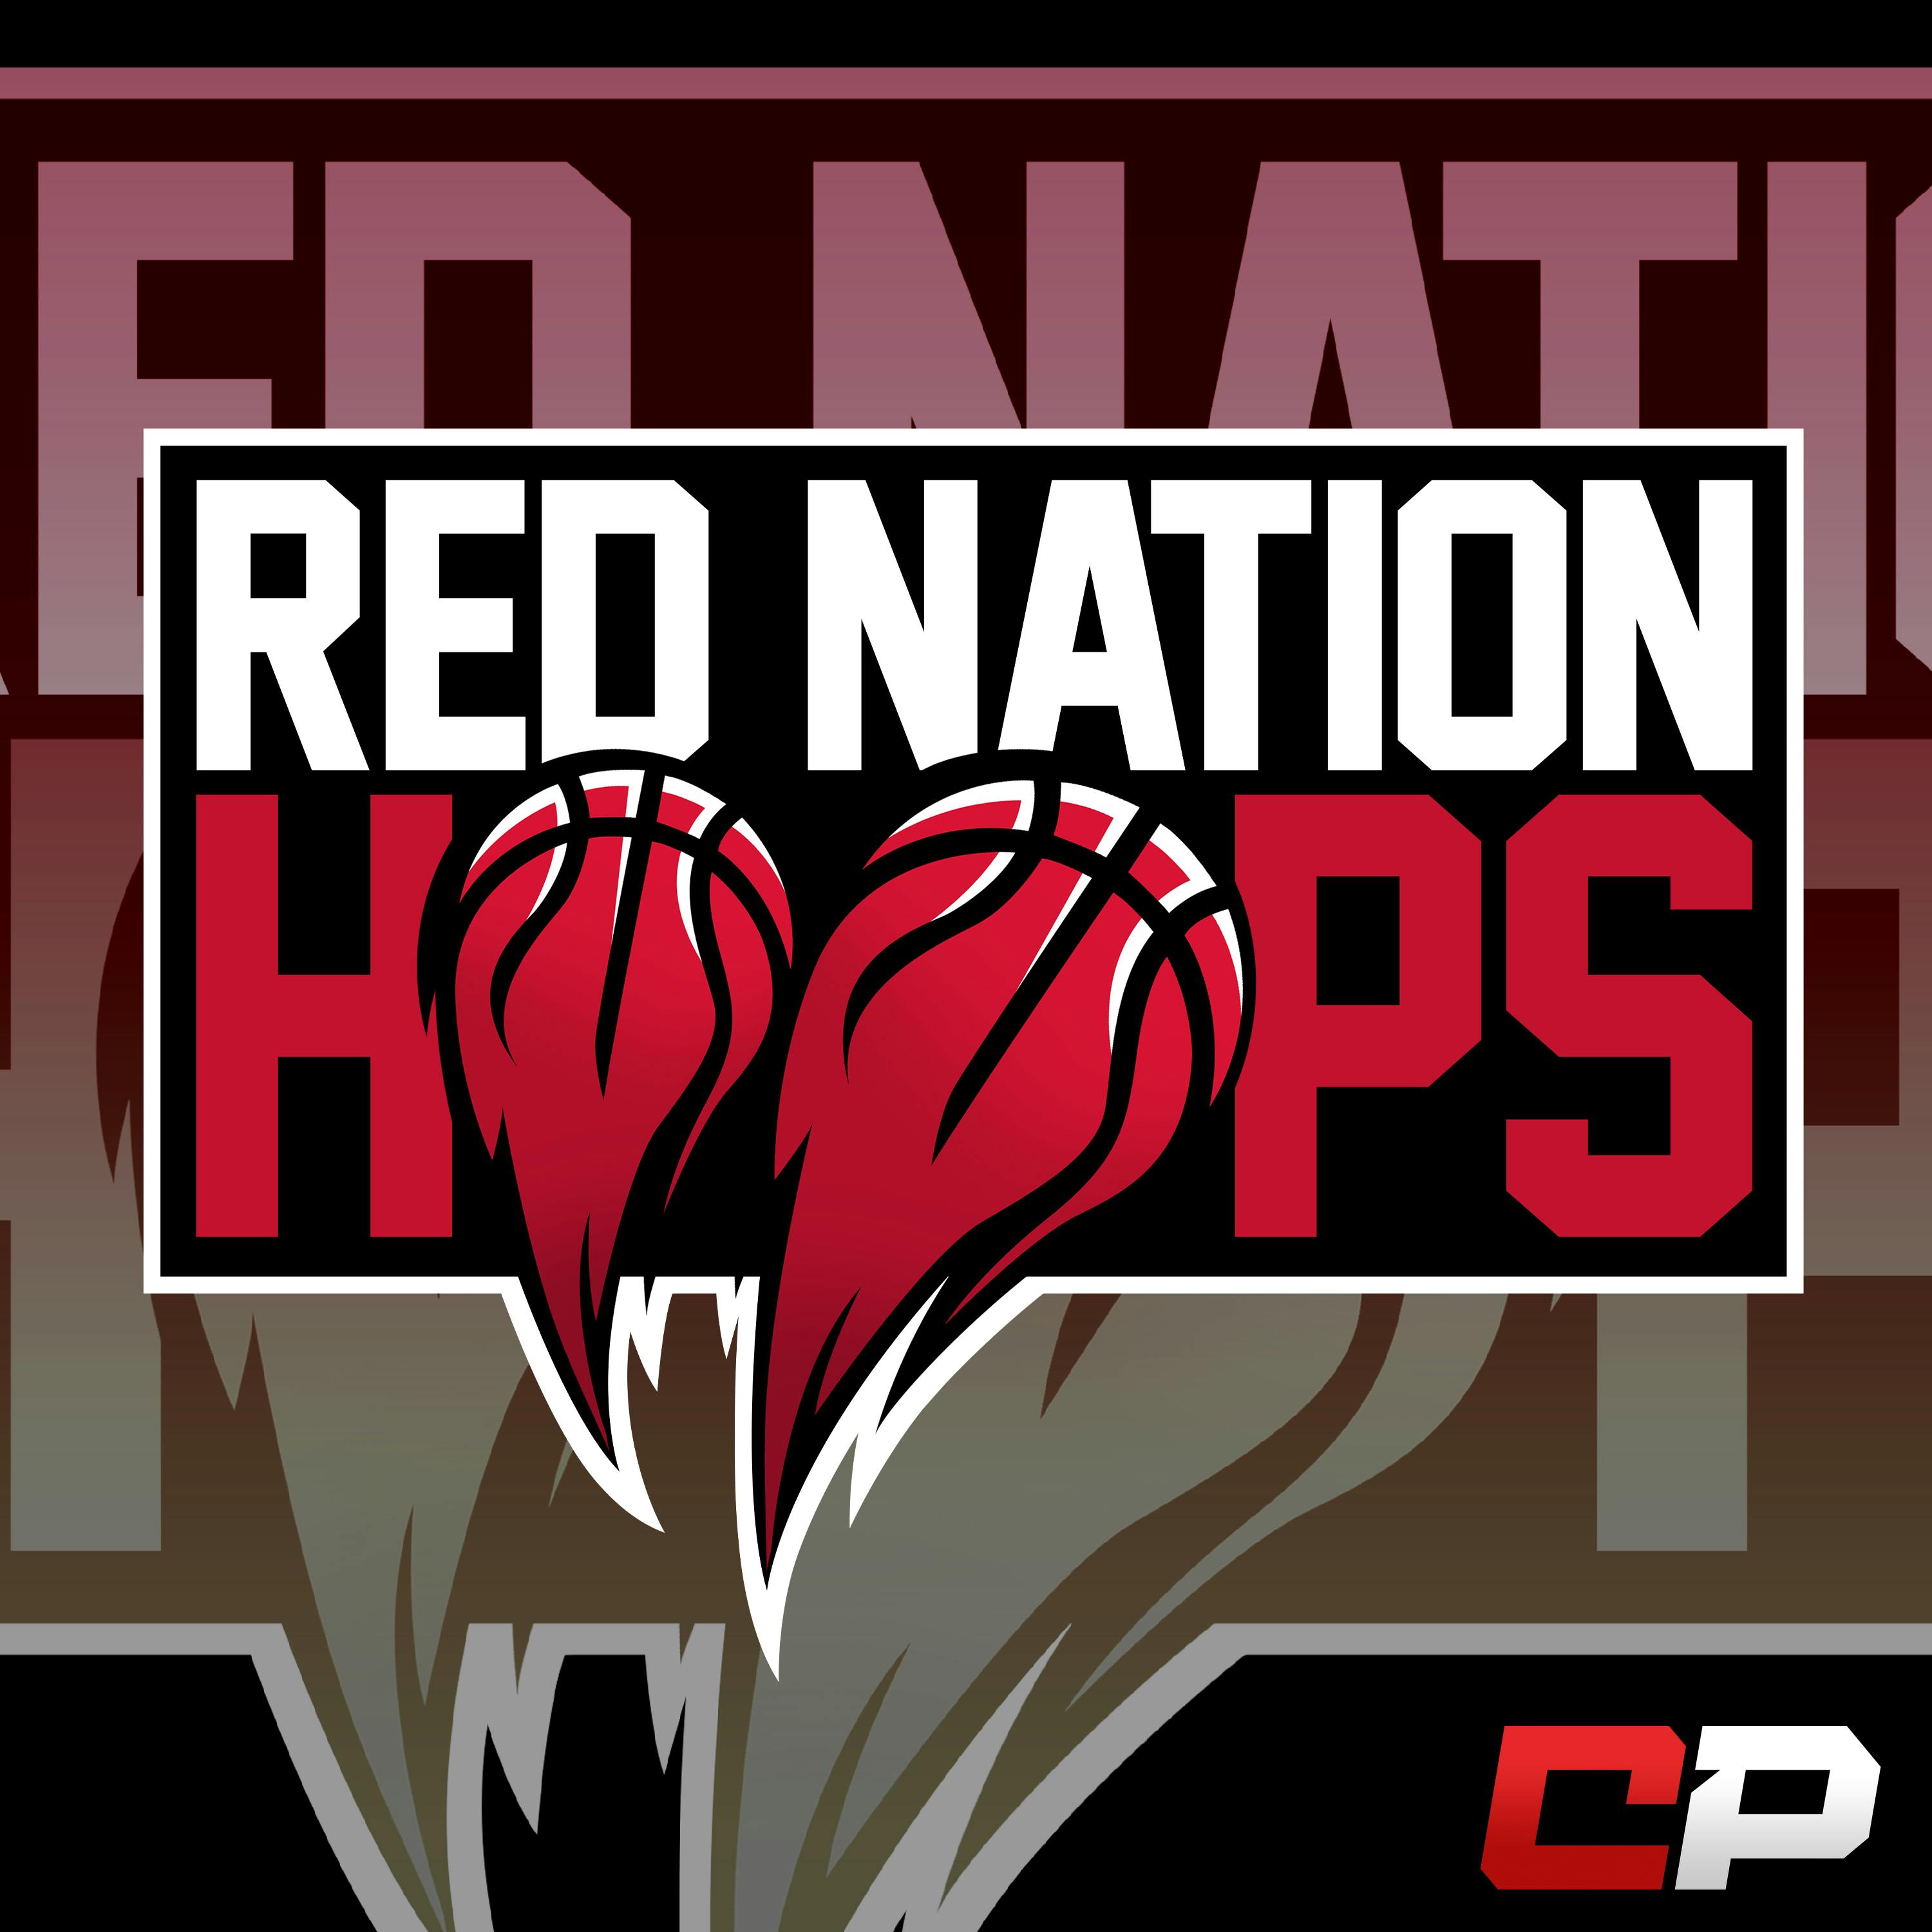 Red Nation Hoops podcast